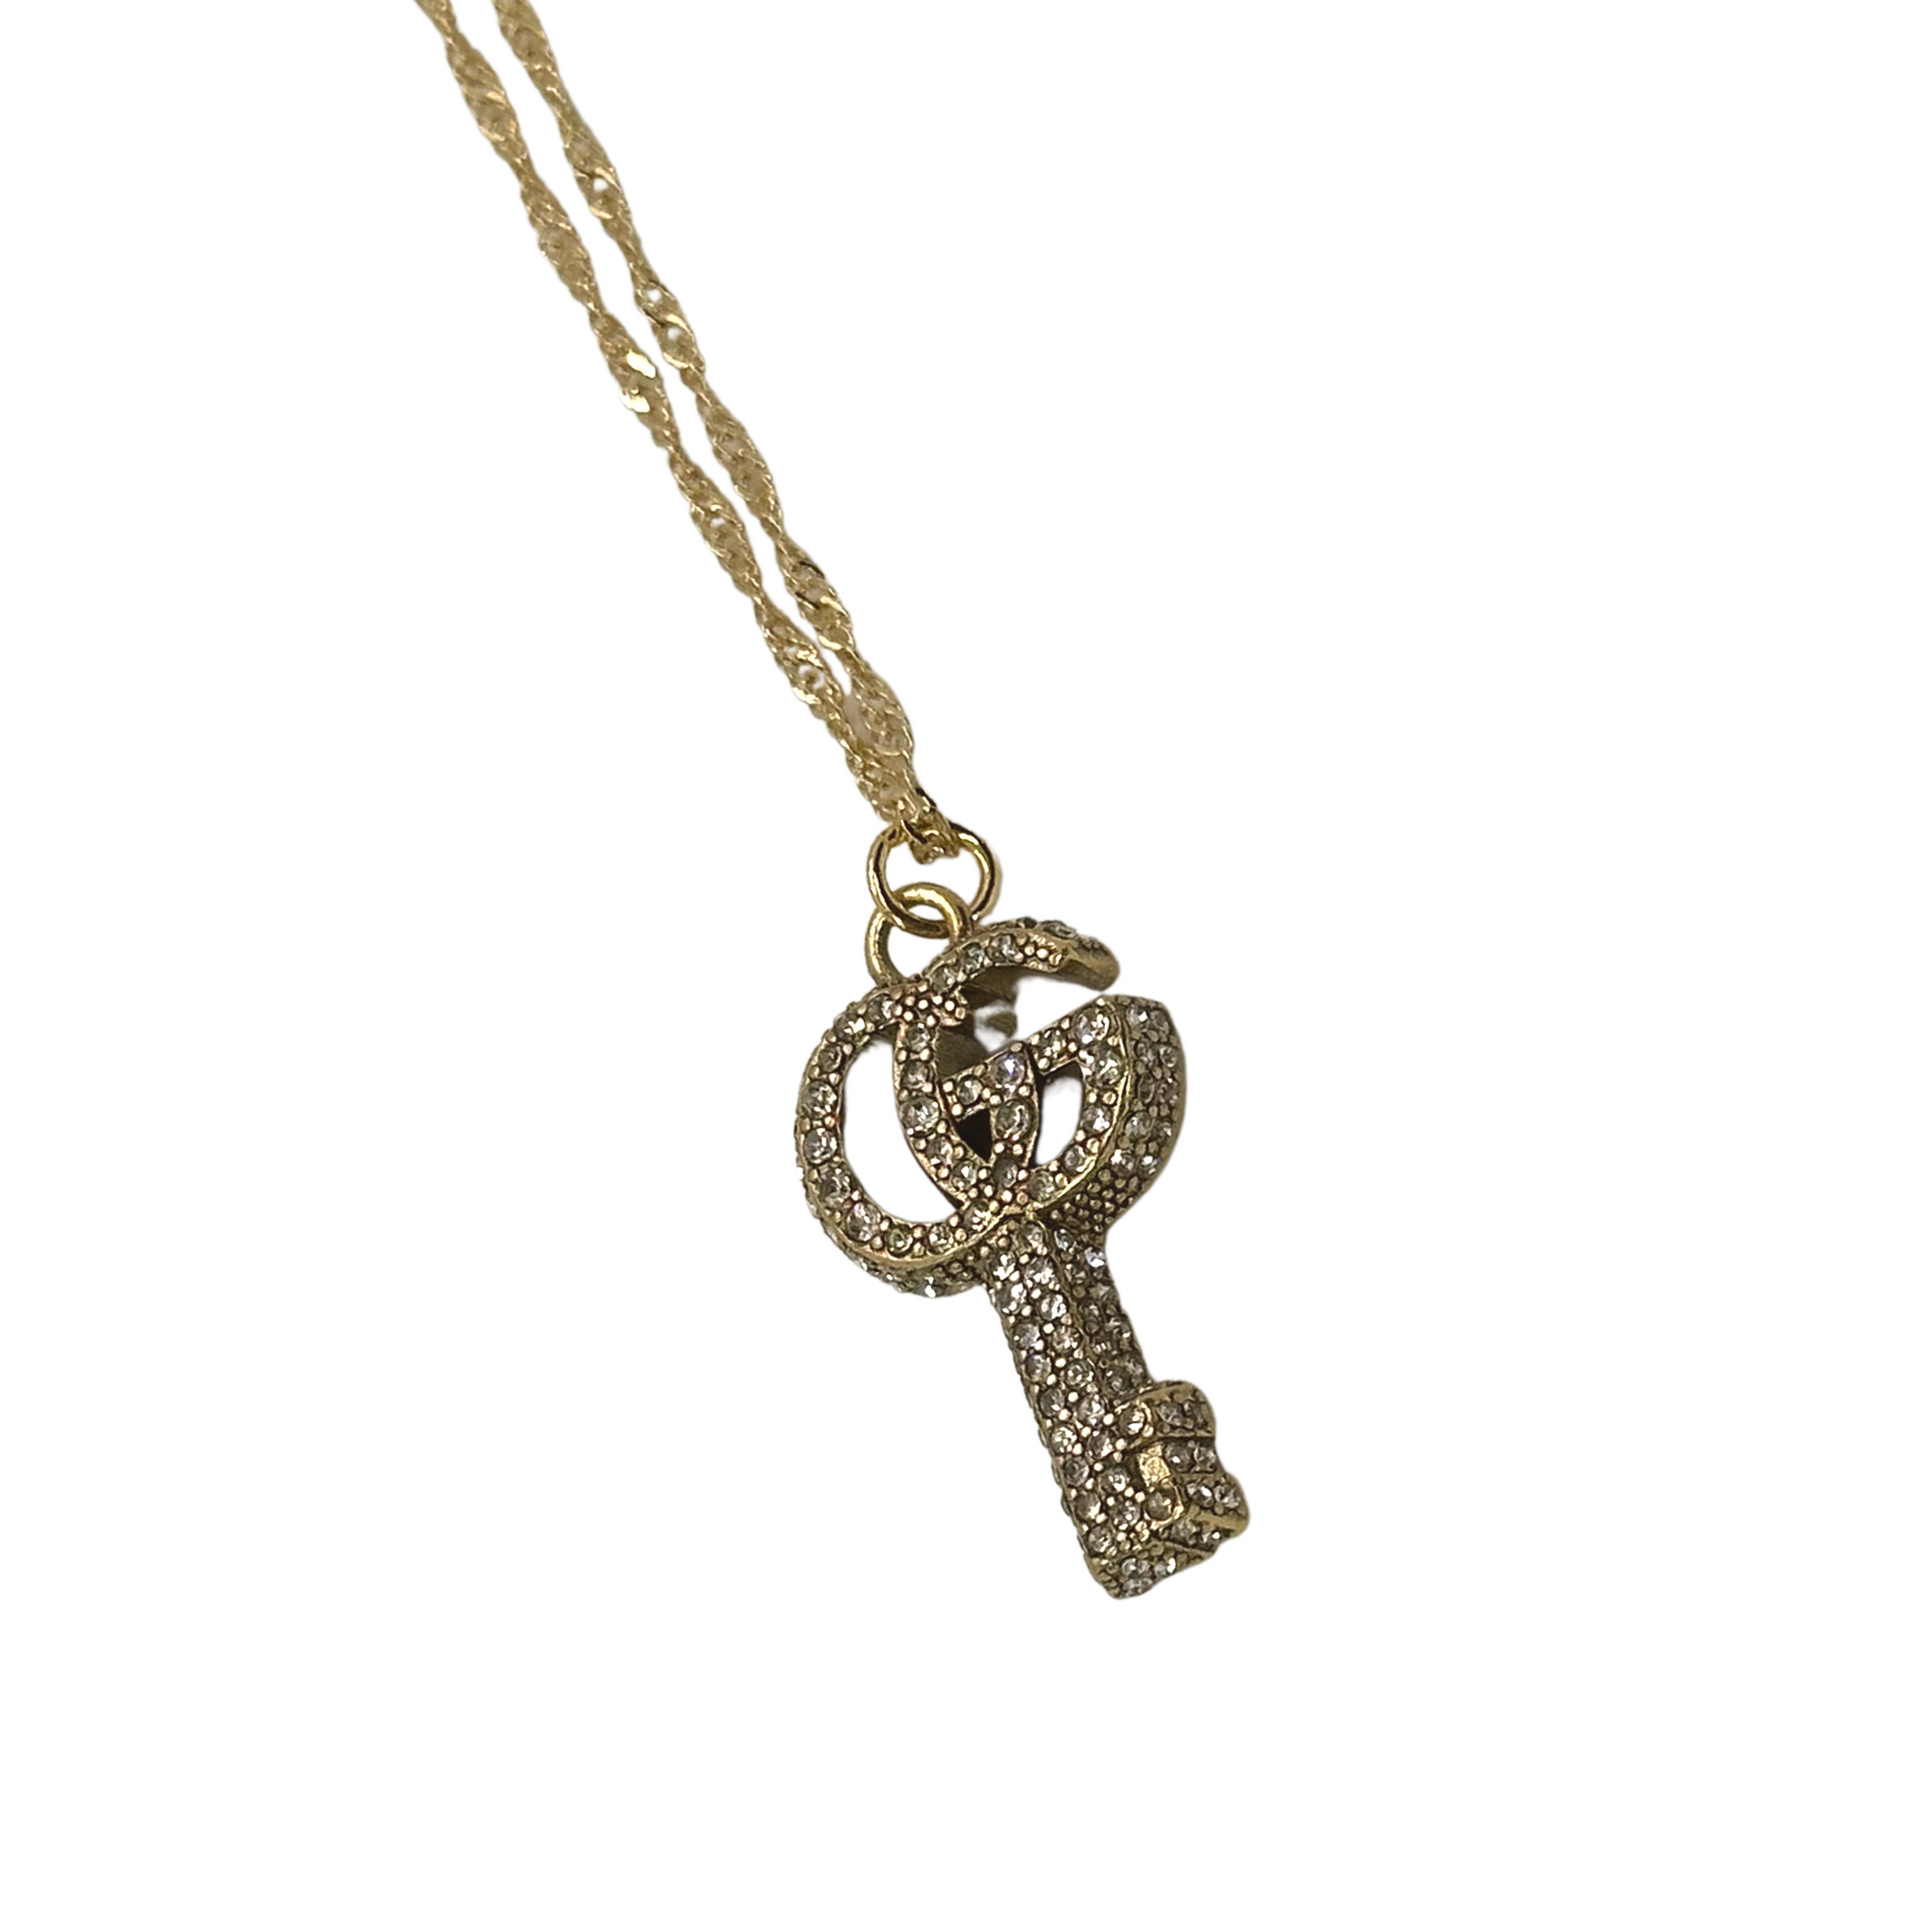 Gucci Double G Key Necklace with Crystals, Gold-Toned Metal, Gold-Toned Metal